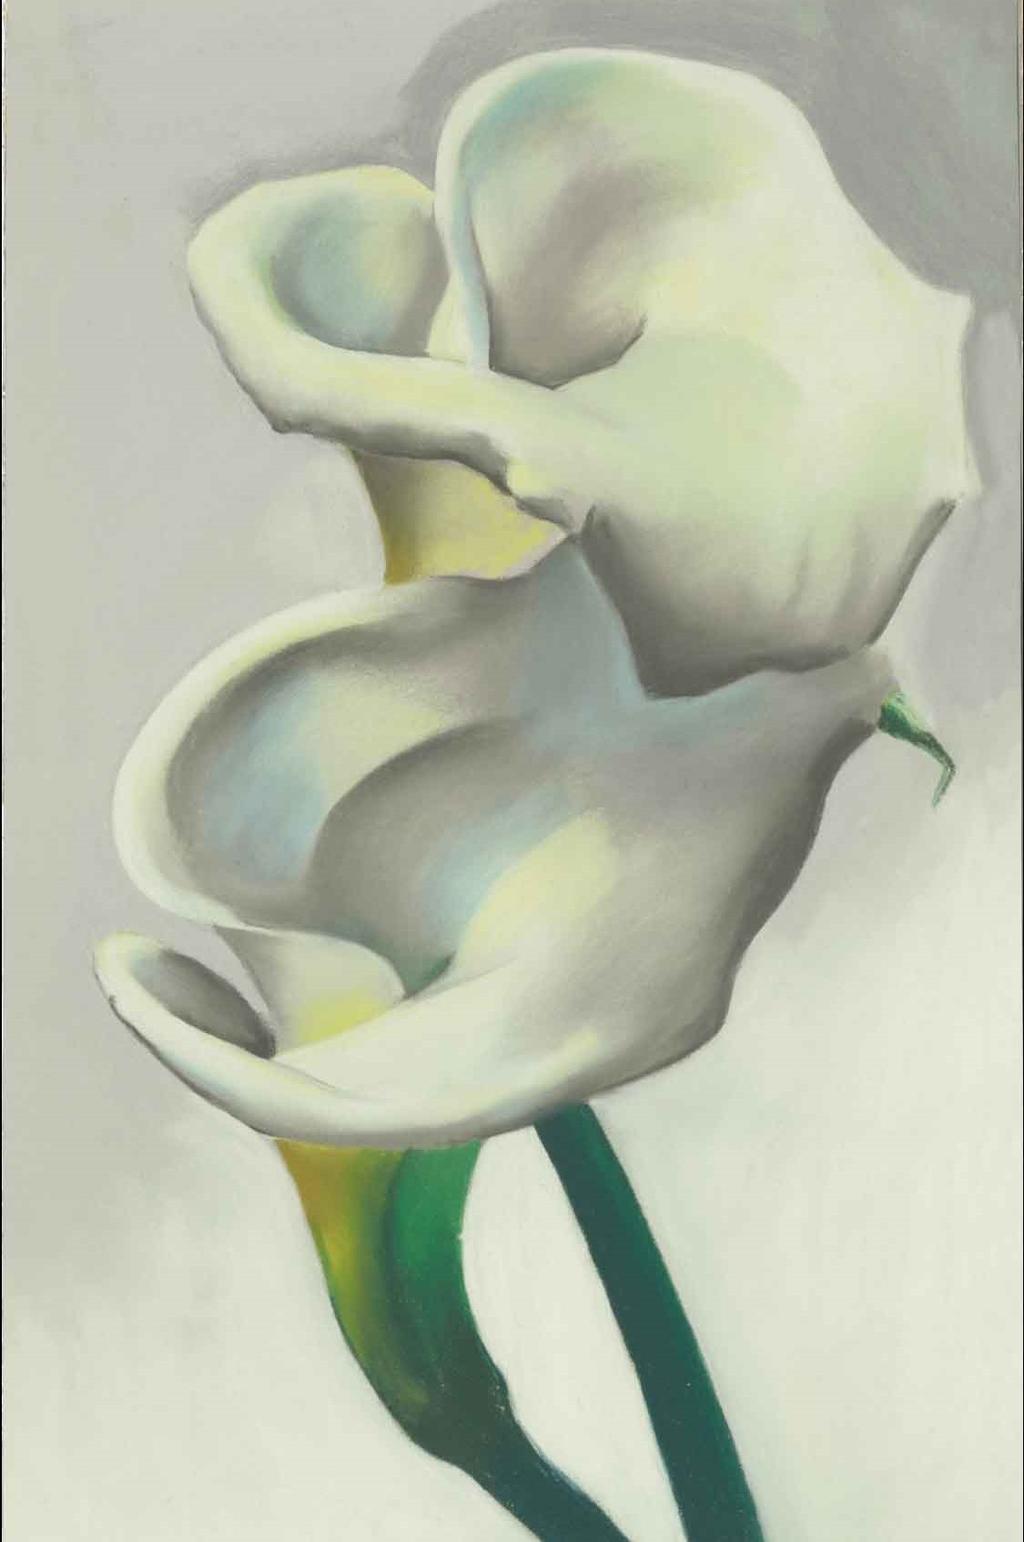 Georgia O Keefe, Two Calla Lilies Together, 1923 In the 1st reading of Acts we hear that Jesus was put to death, but that God raised him on the third day allowing him to appear not to everyone - but